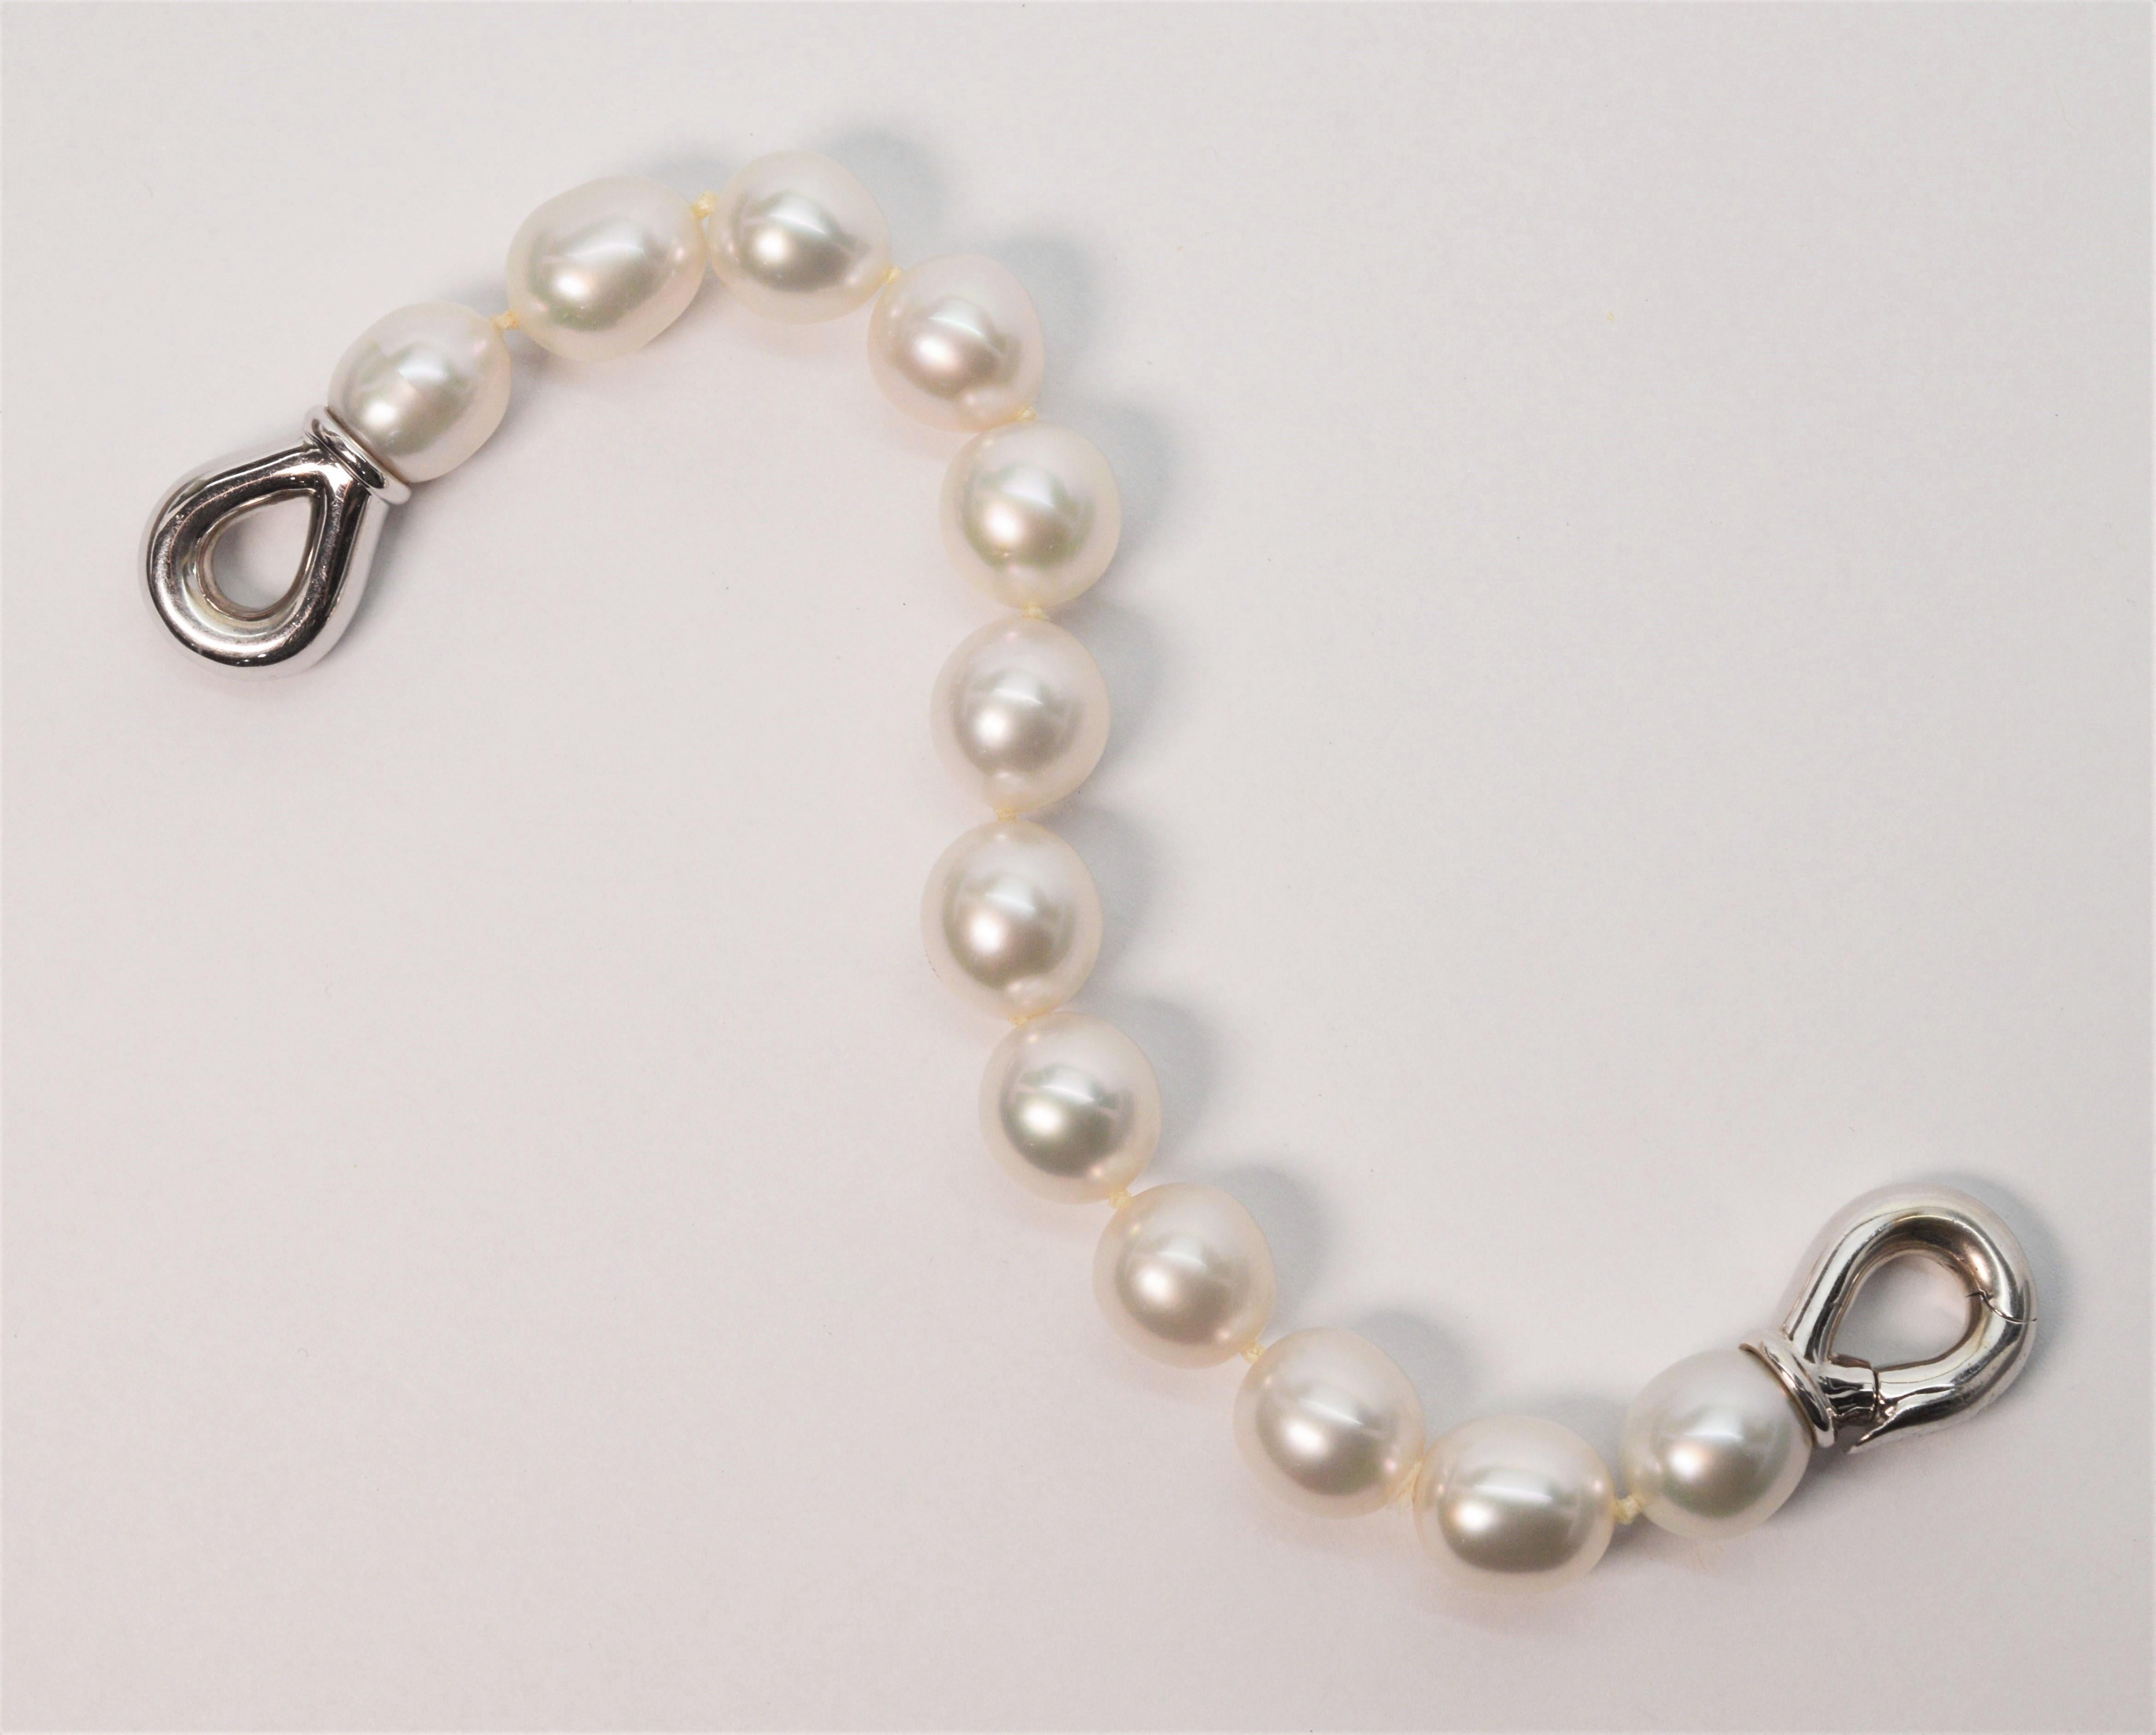 Round Cut Utopia Milan South Sea Pearl Bracelet with 18K White Gold Buckle